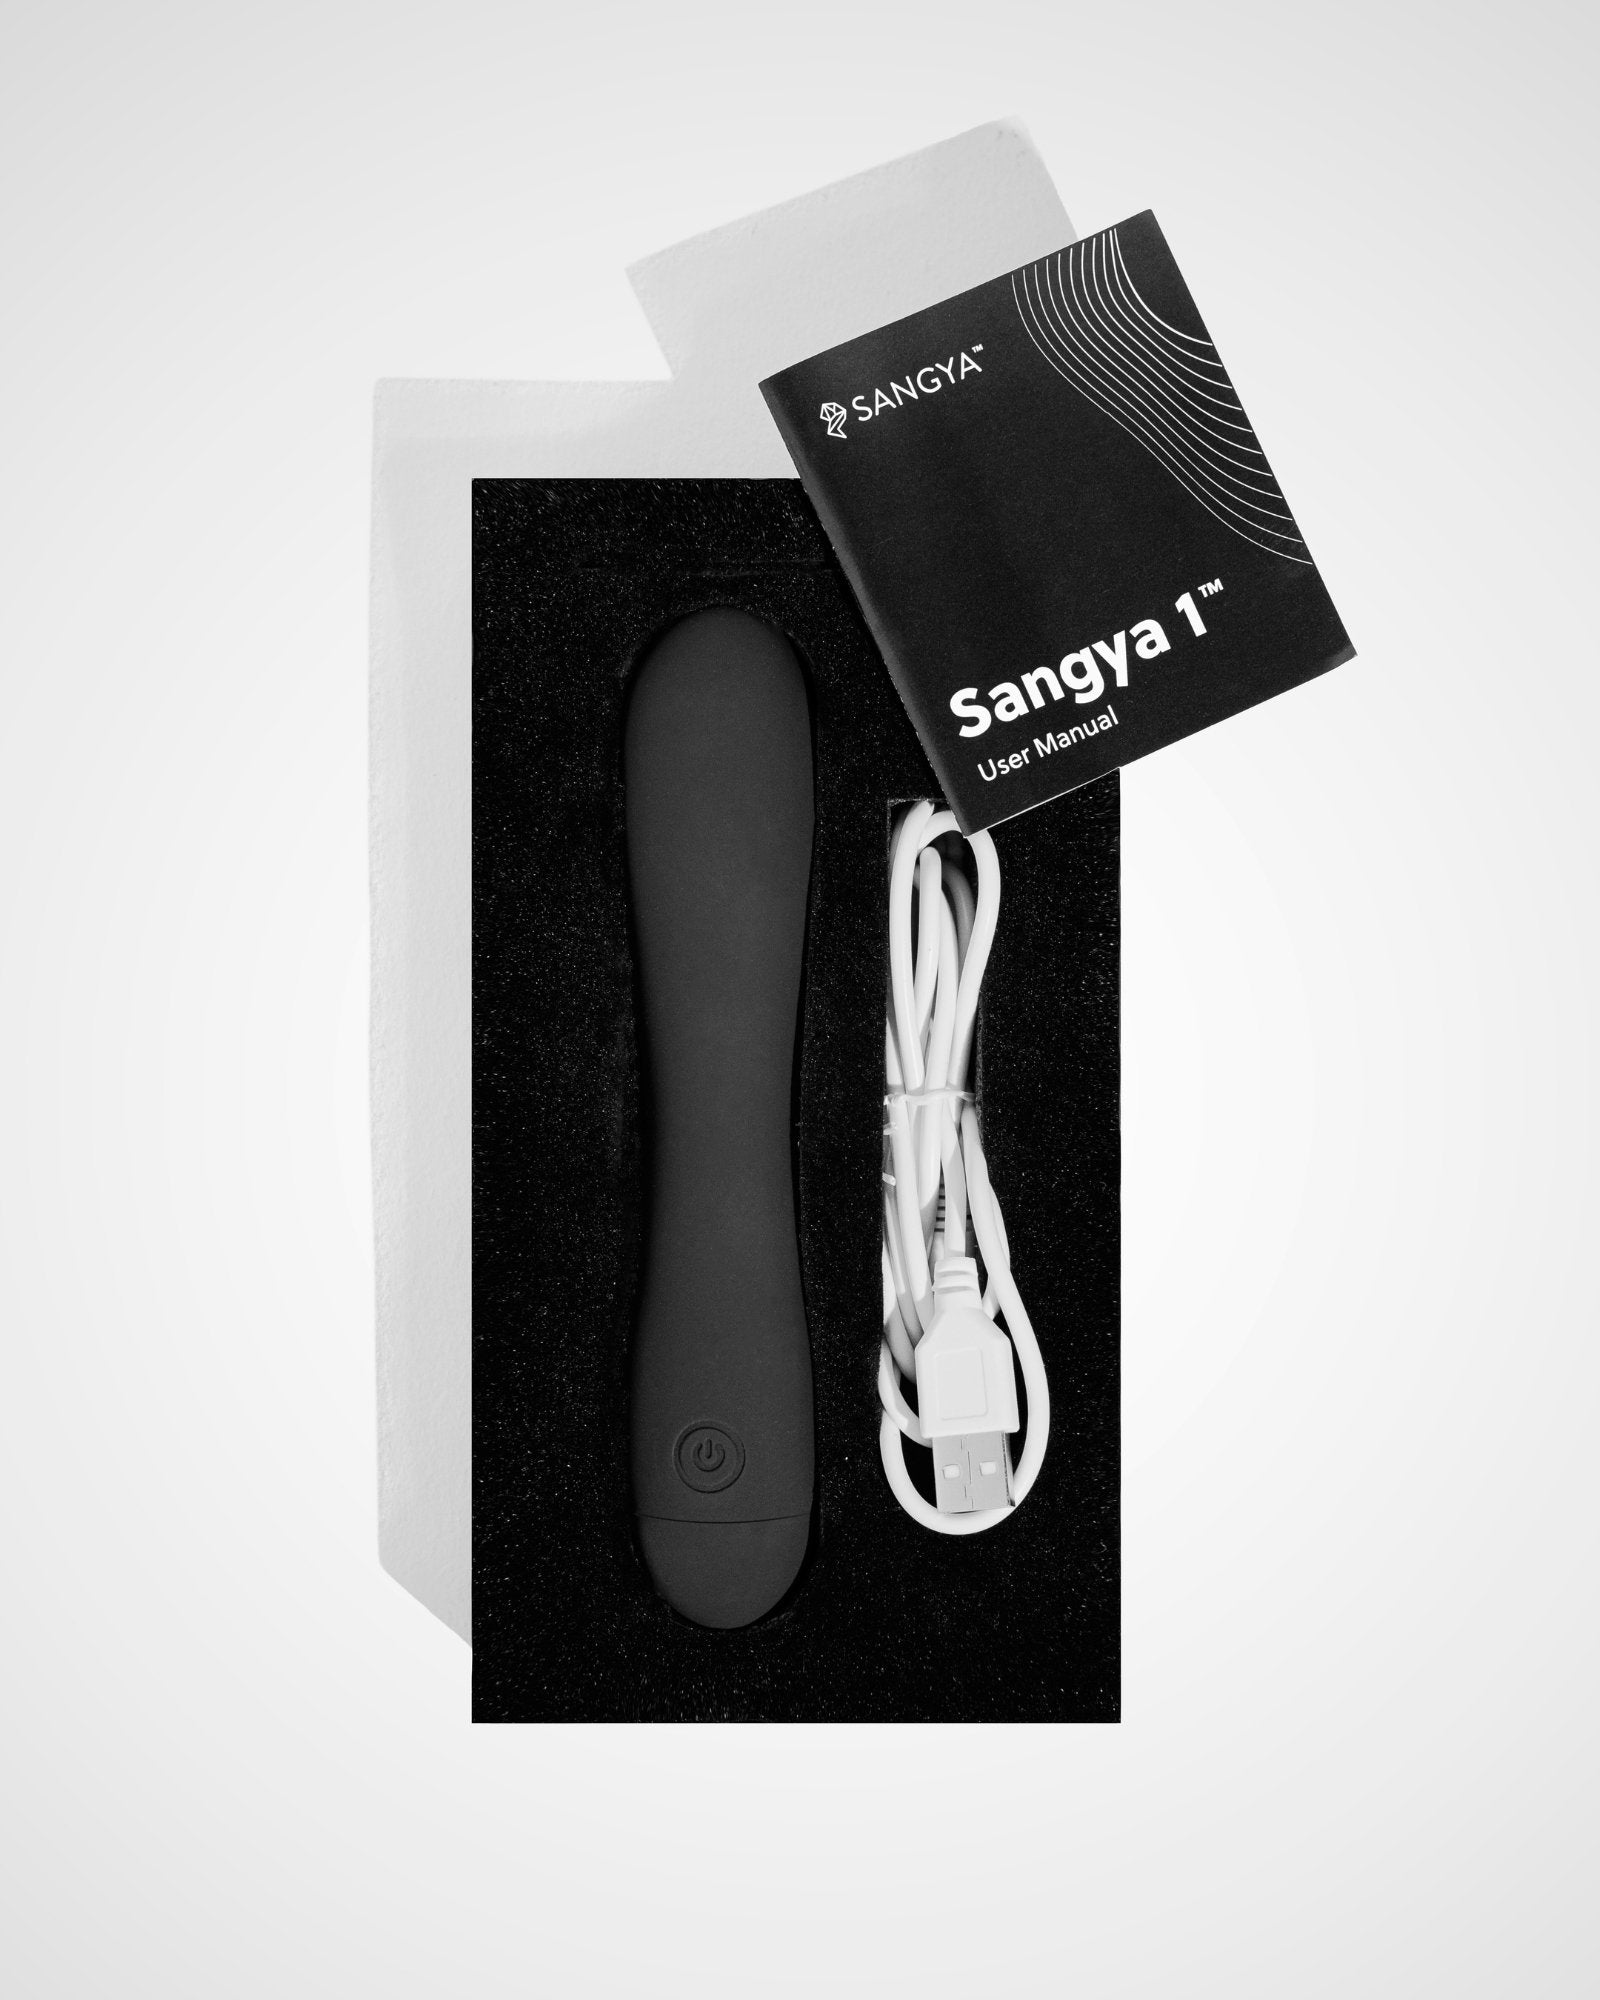 Sangya 1 - G spot vibrator for heterosexual and homosexual couples